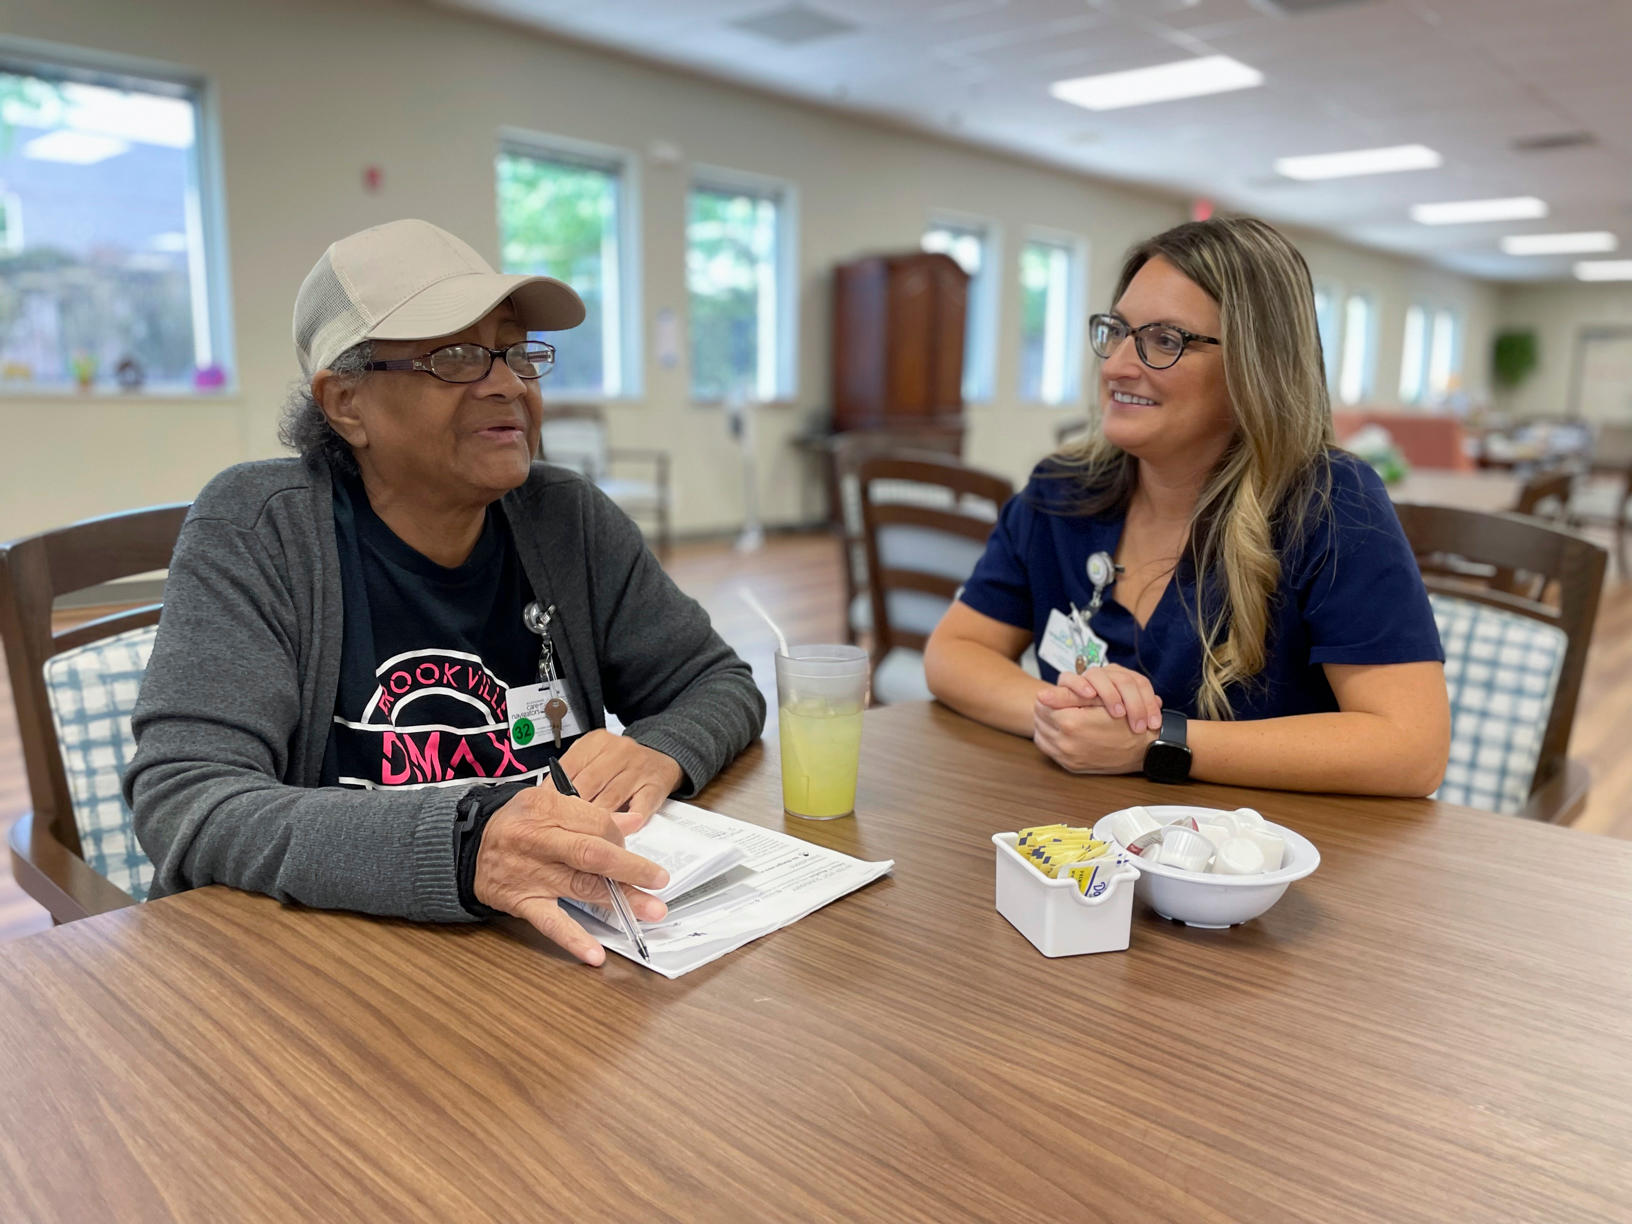 Bluegrass PACE Care participants are age 55+, live in the PACE service area, require a specific type of care that may otherwise require a nursing home, and are able to live safely at home with support and care from PACE.